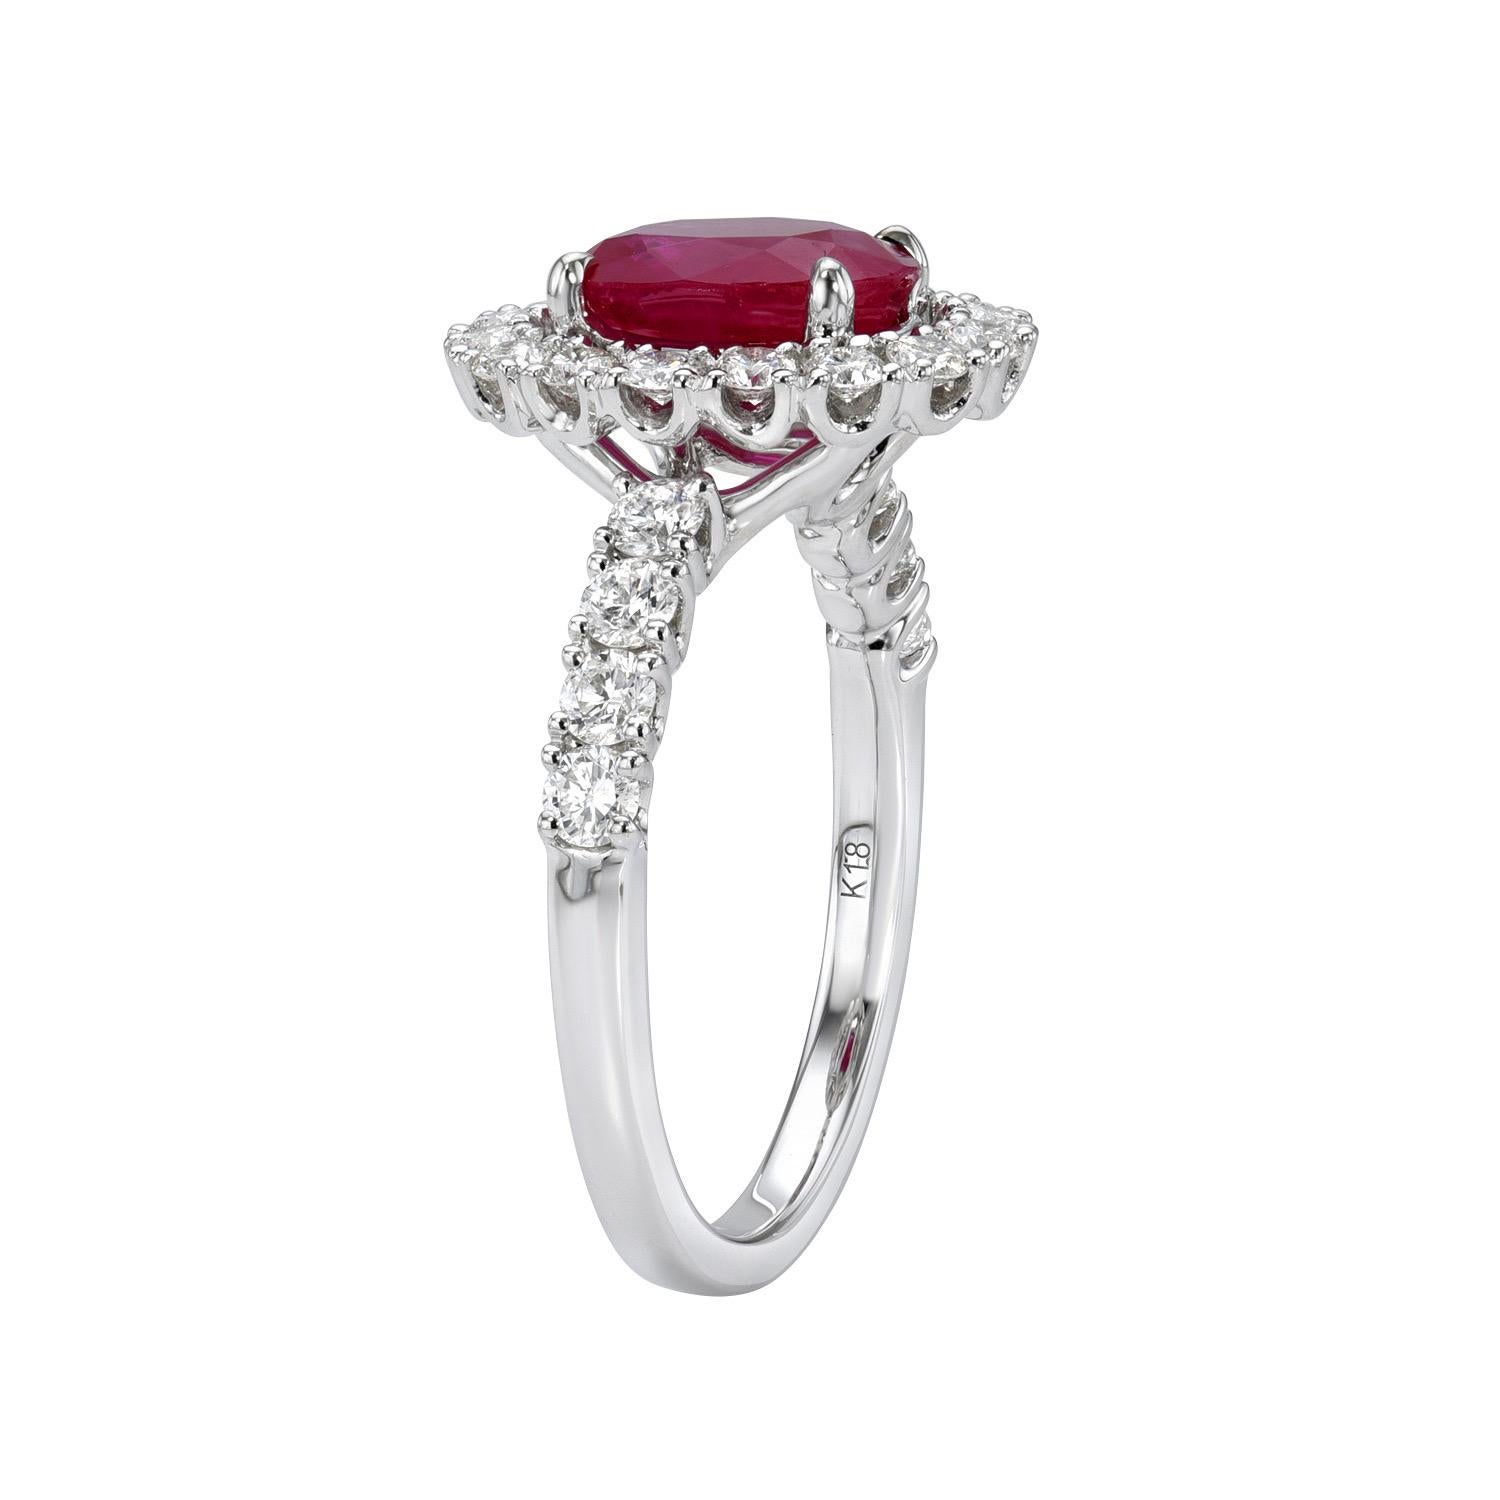 Gorgeous 2.14 carat Ruby oval 18K white gold ring, decorated with round brilliant diamonds totaling 0.86 carats.
Ring size 6.5. Resizing is complementary upon request.
Returns are accepted and paid by us within 7 days of delivery.